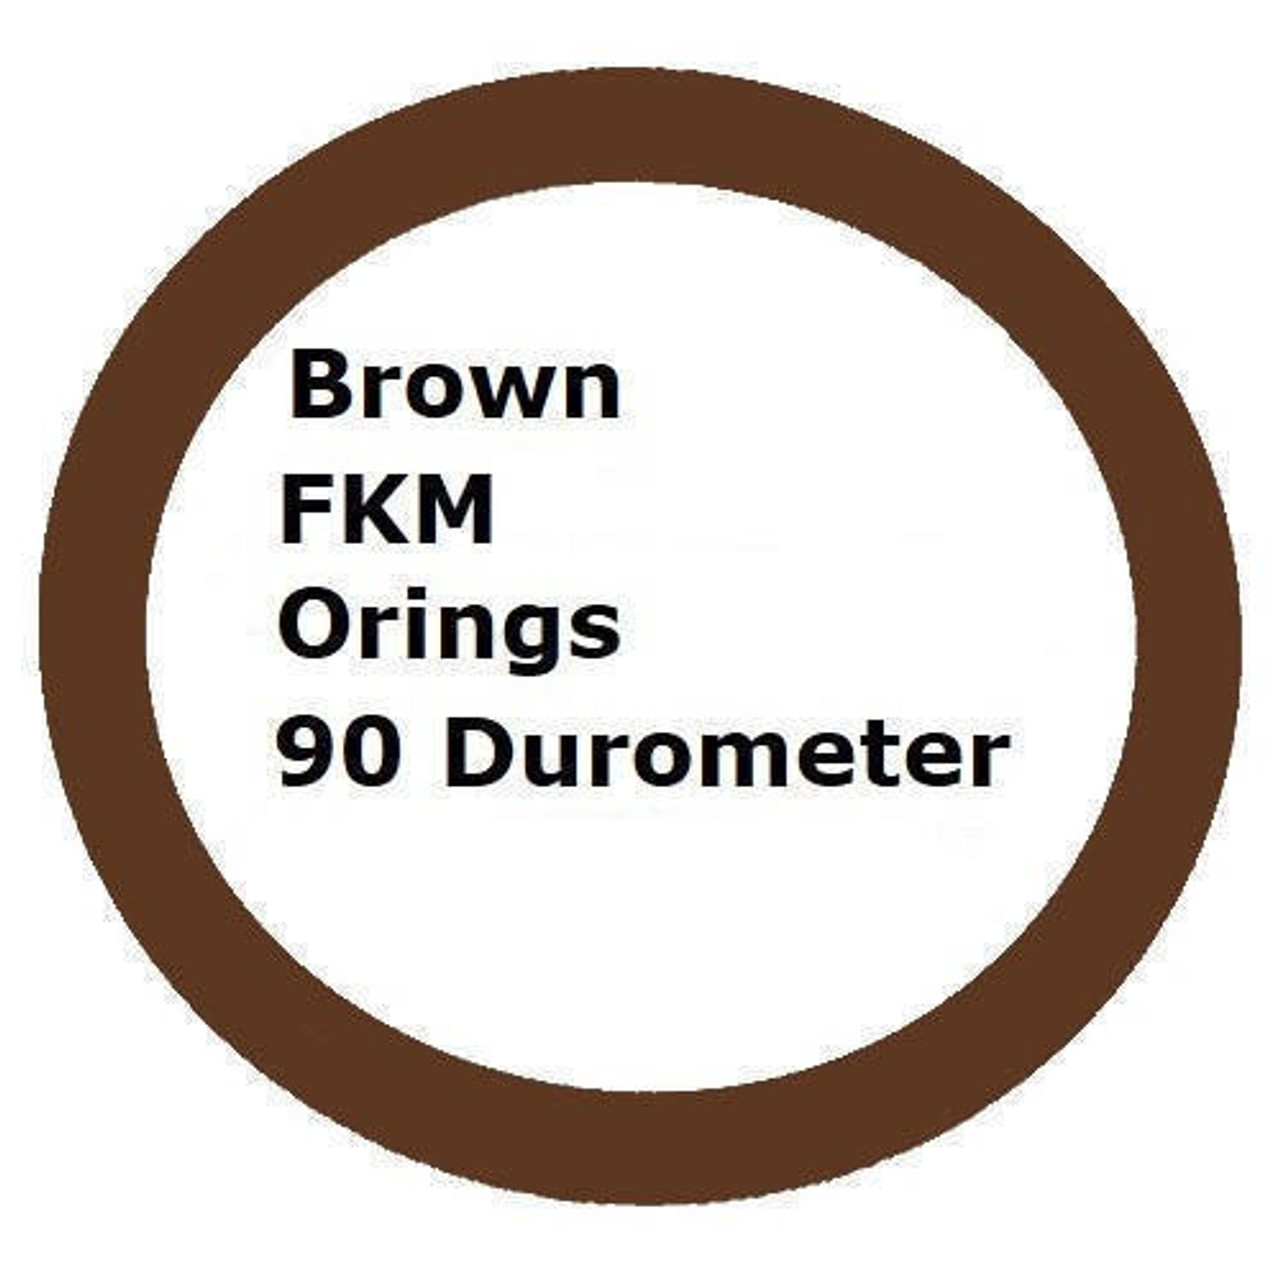 FKM 90 Brown Orings Size 232 Price for 1 pc